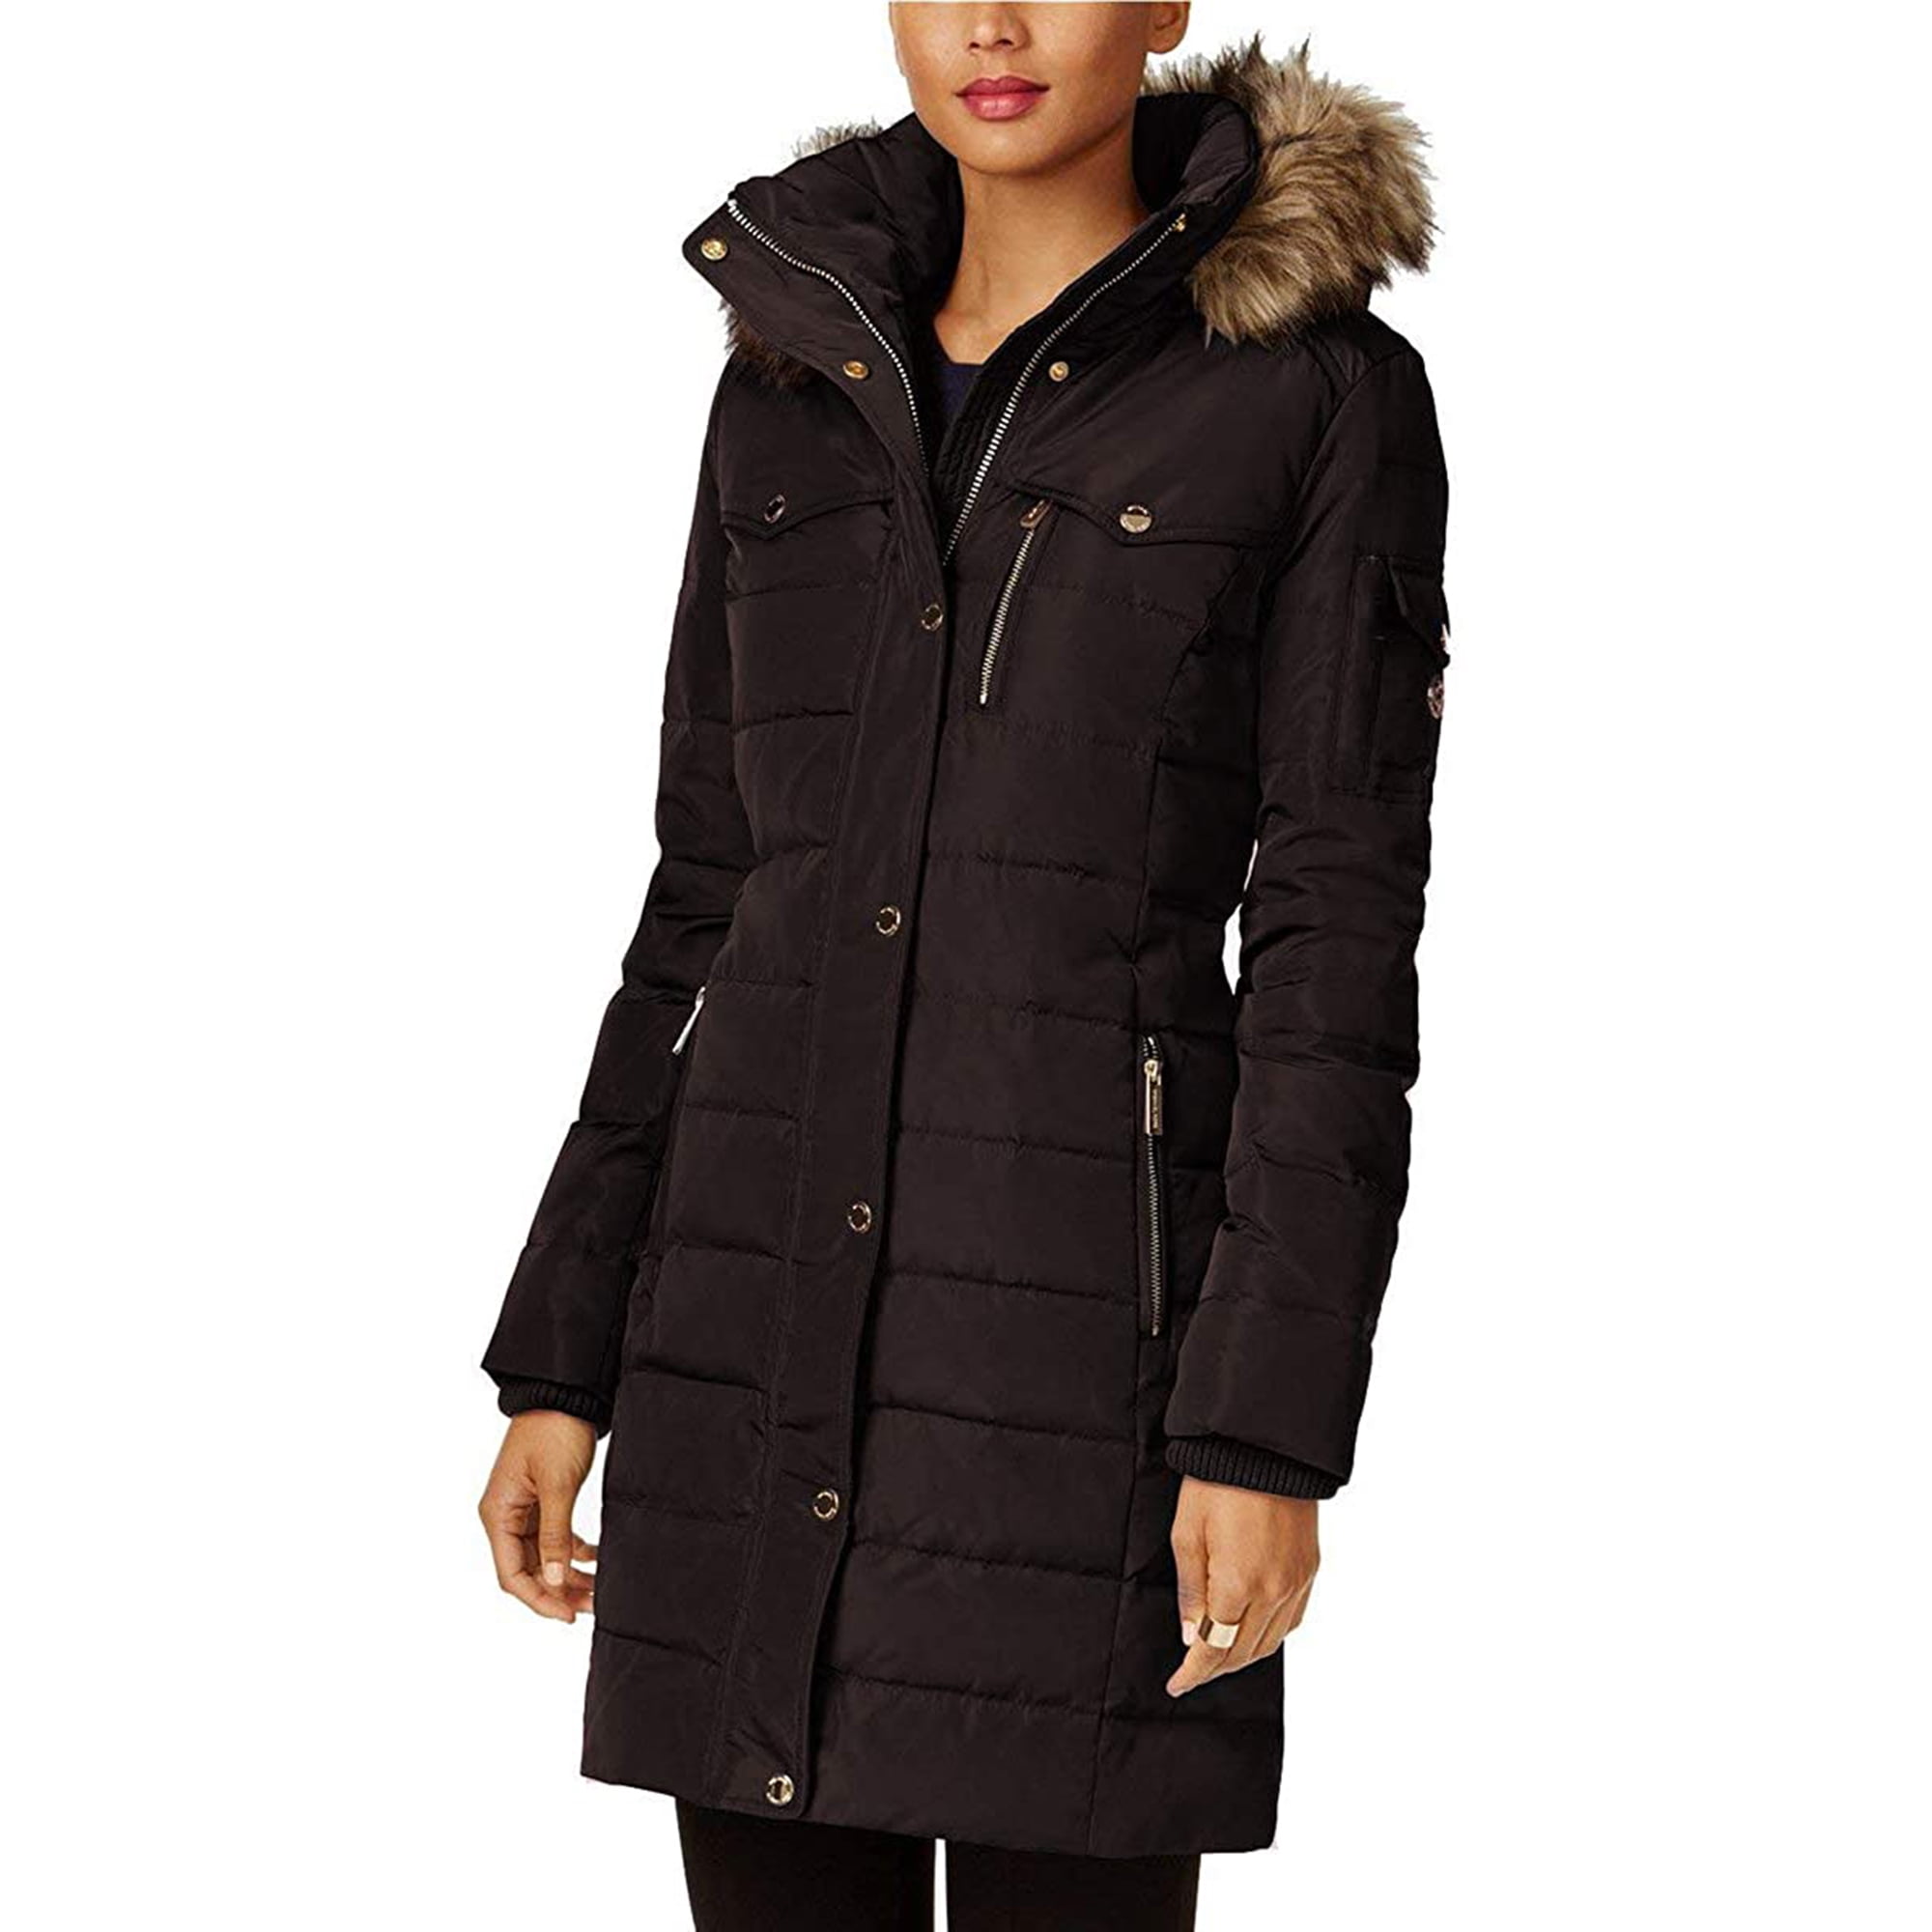 Michael Kors Women Chocolate Brown Down Coat - Zipper Closure Puffer Coat  for Women With Faux-Fur Trim Hood - Imported Women Winter Coat with  Removable Hood, Stand Collar & Zipper Pockets -